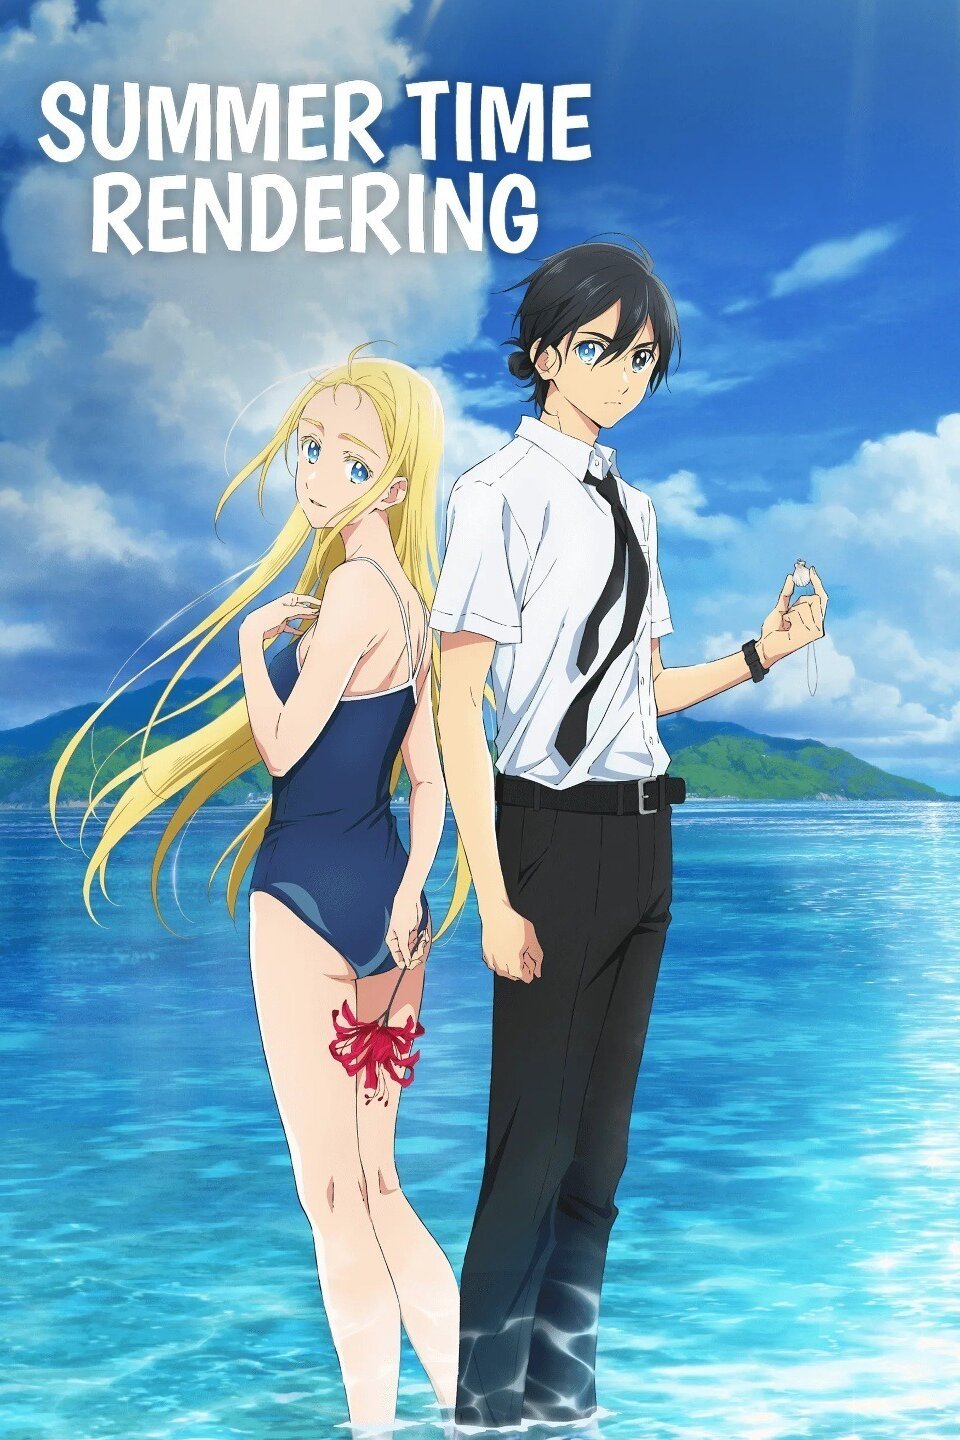 Summer Time Rendering GN 3 - Review - Anime News Network